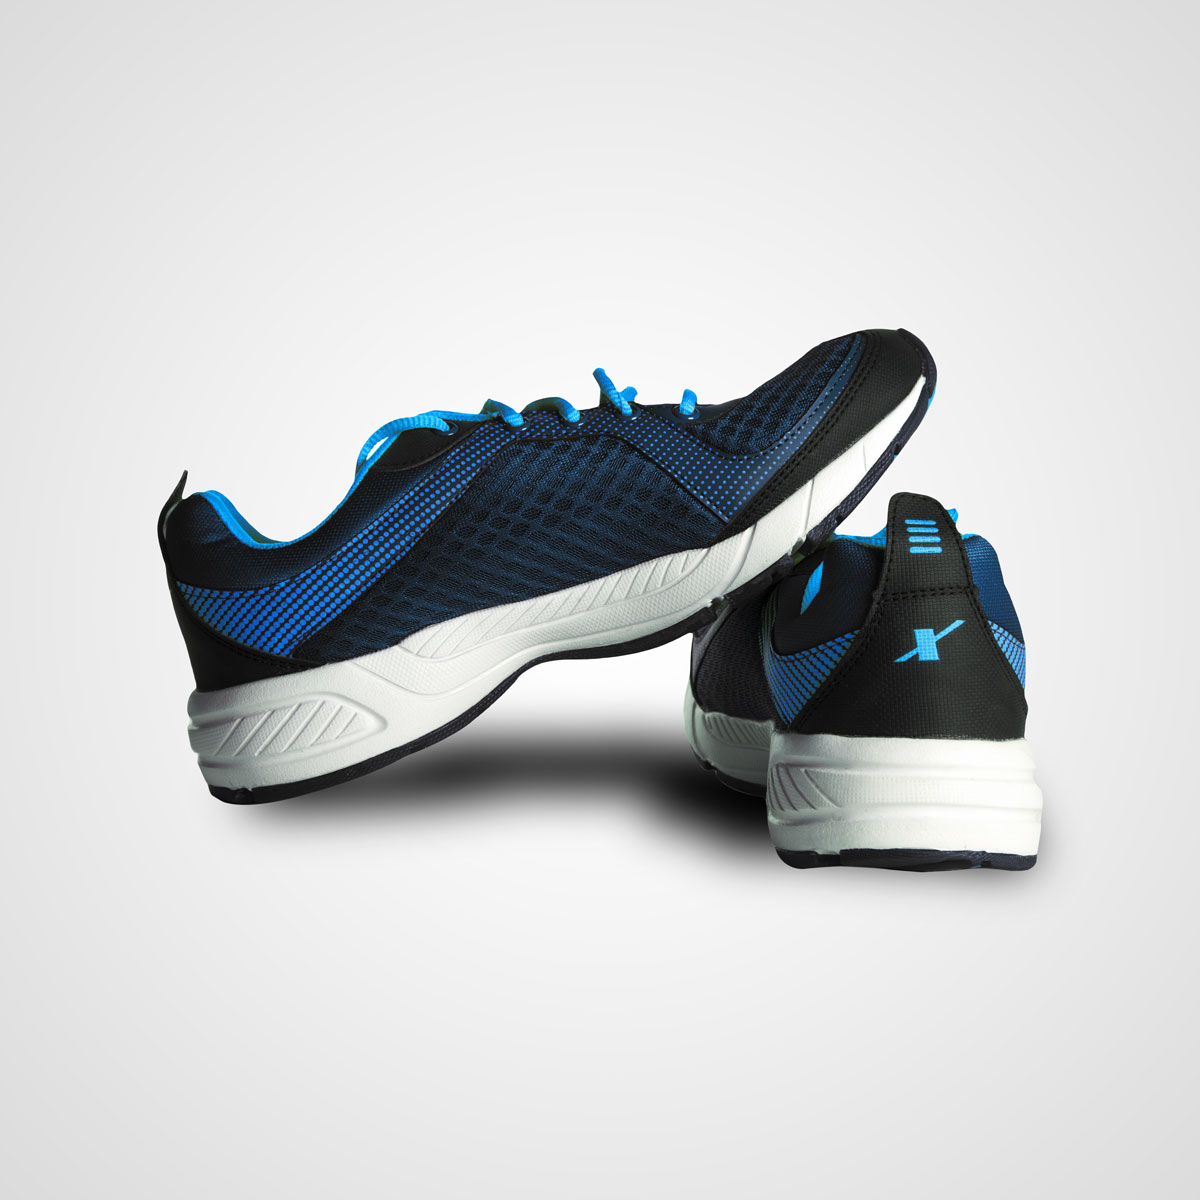 DECANE Air Pro Mens SportsGymRunning Shoes Running Shoes For Men  Buy  DECANE Air Pro Mens SportsGymRunning Shoes Running Shoes For Men Online  at Best Price  Shop Online for Footwears in